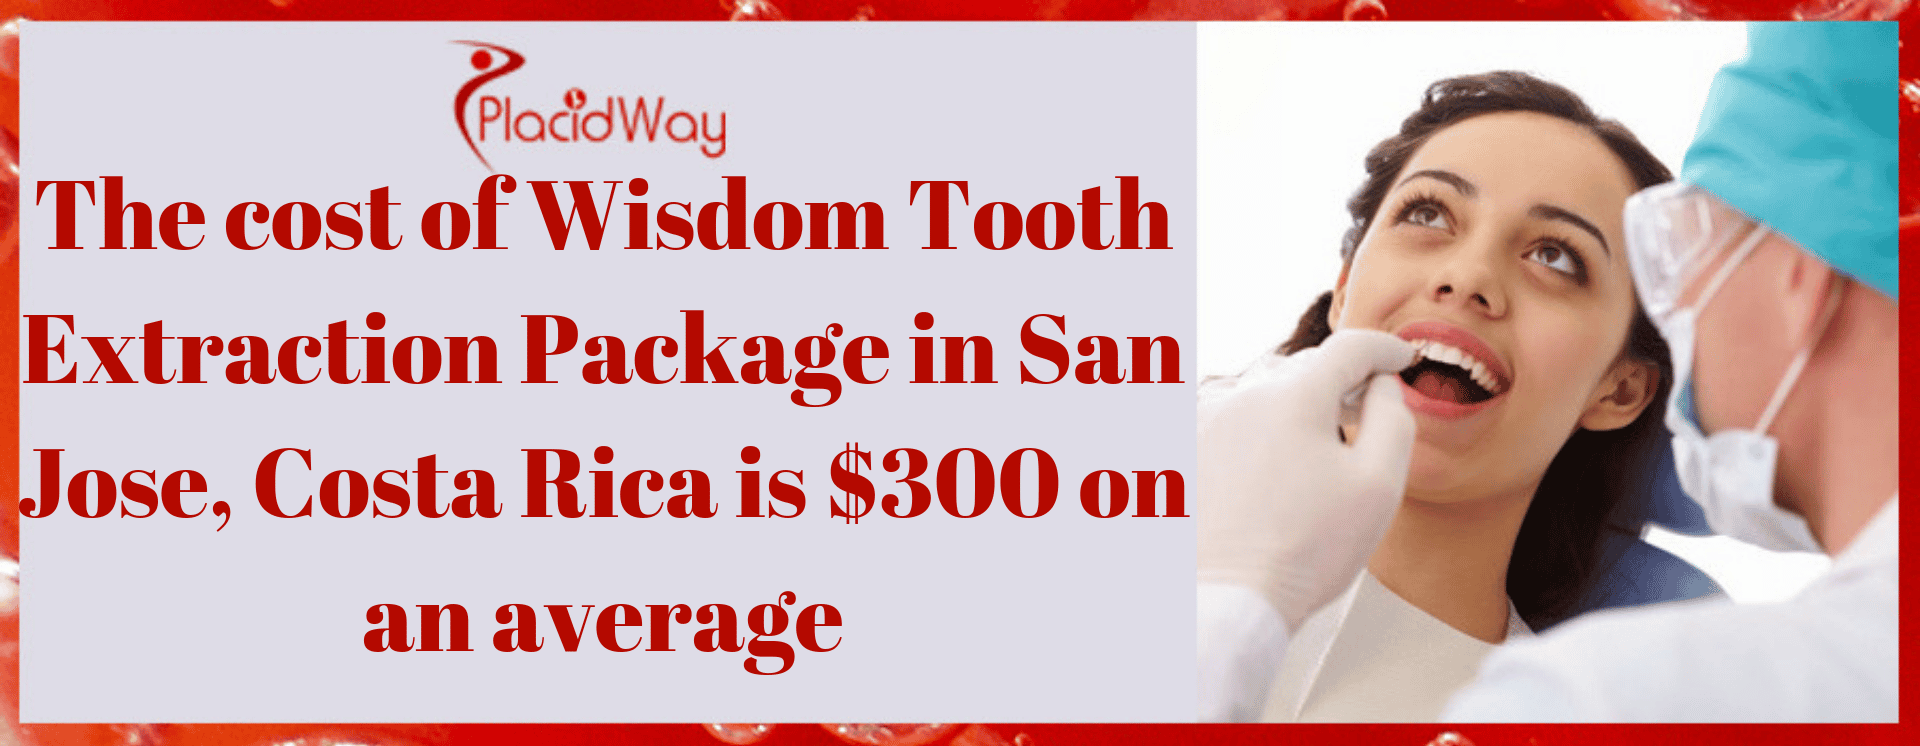 The cost of Wisdom Tooth Extraction Package in San Jose, Costa Rica is $300 on an average